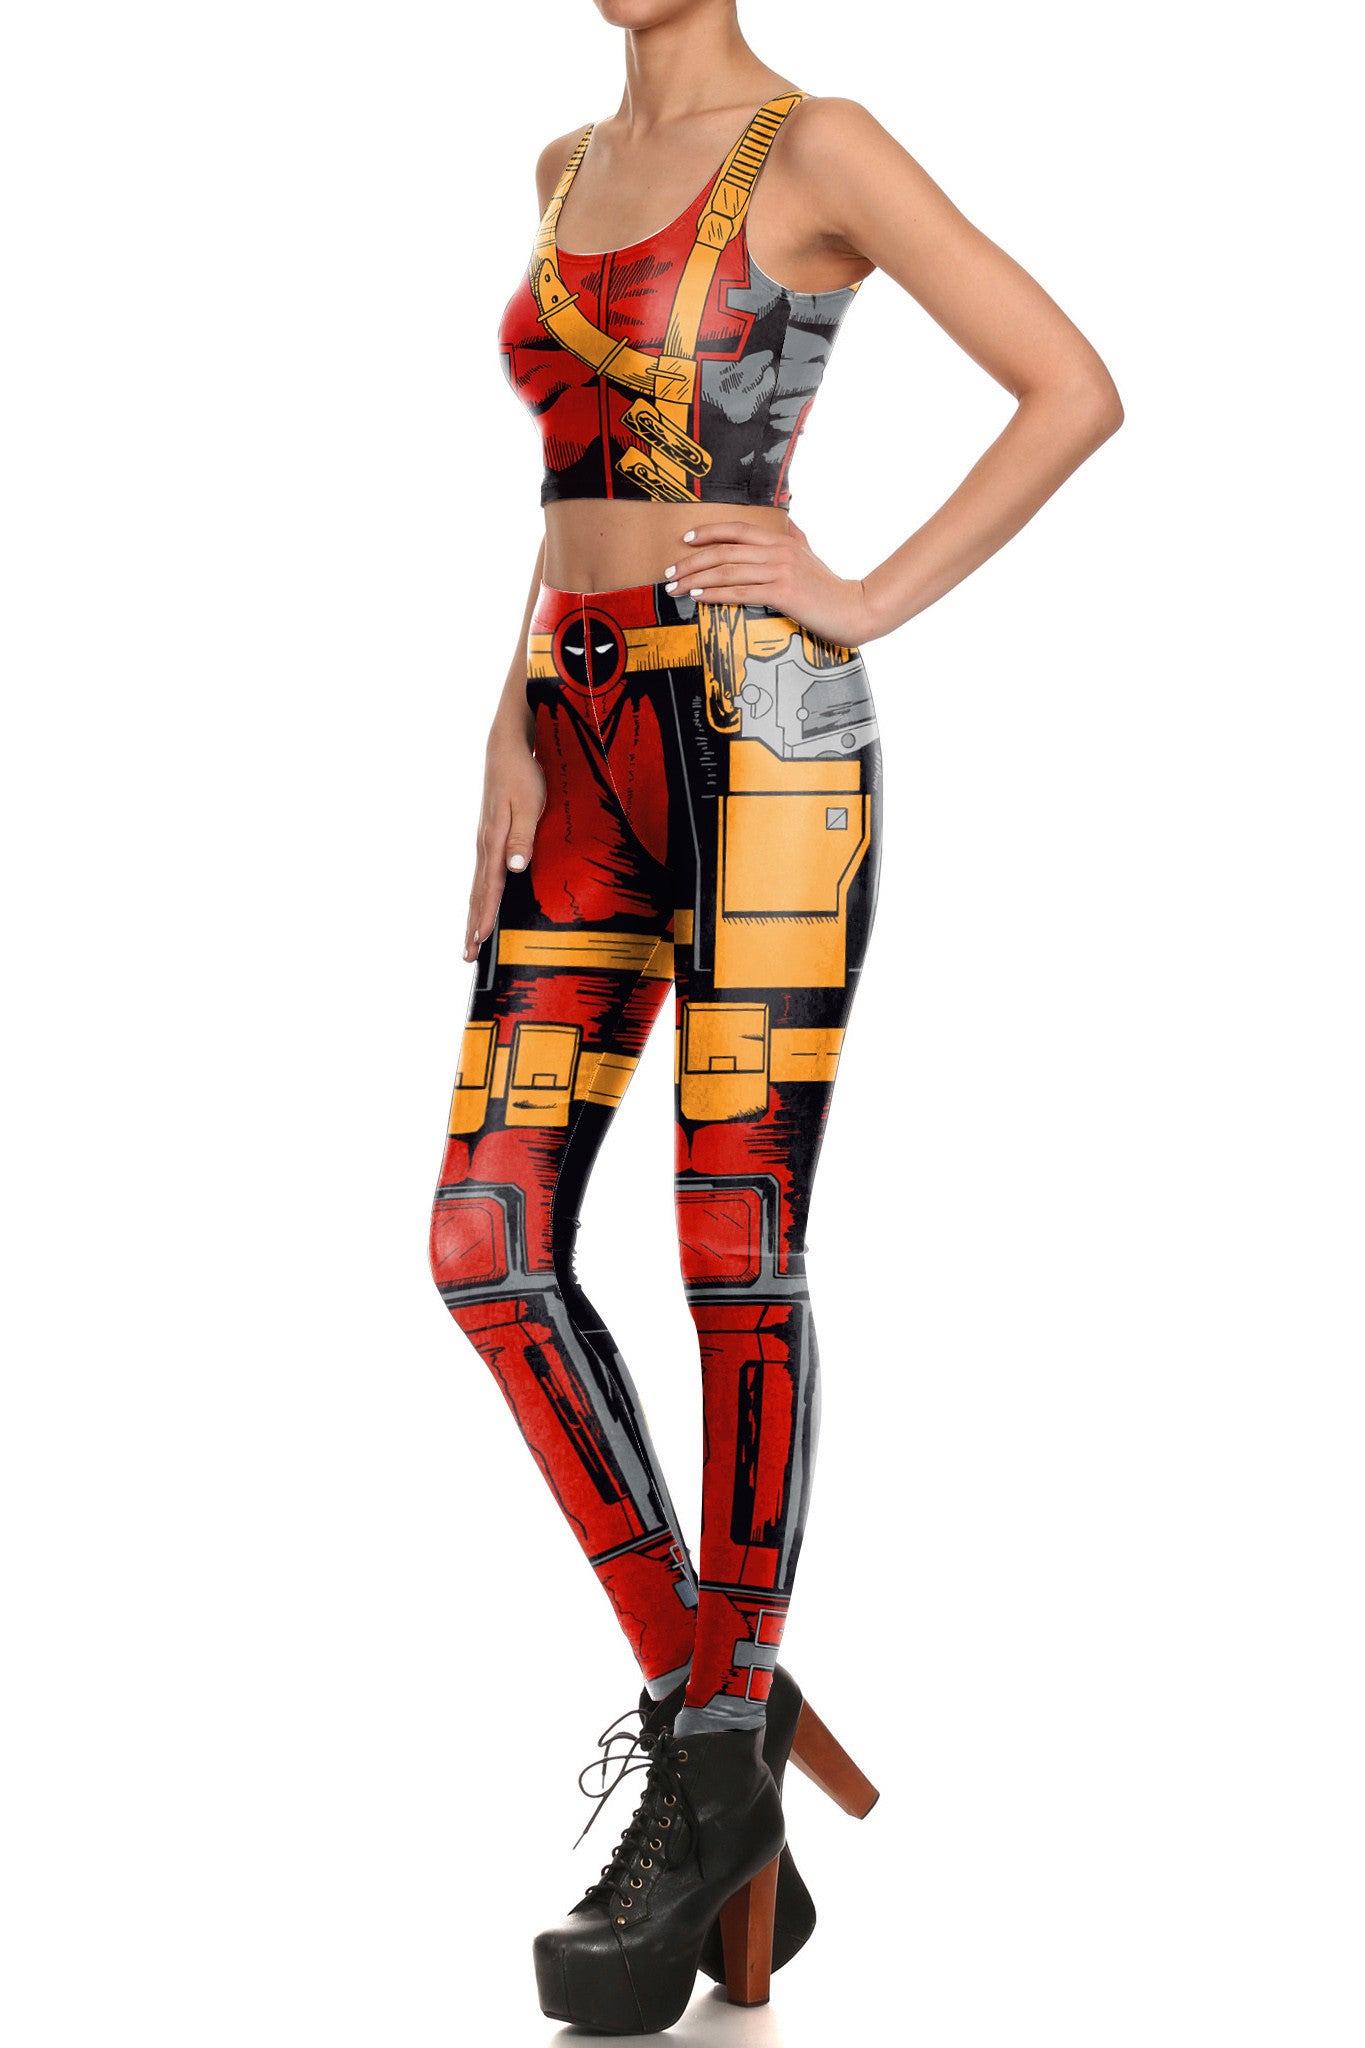 Cosplay Fans Leggings, Tops & Outfits - Hello Moa